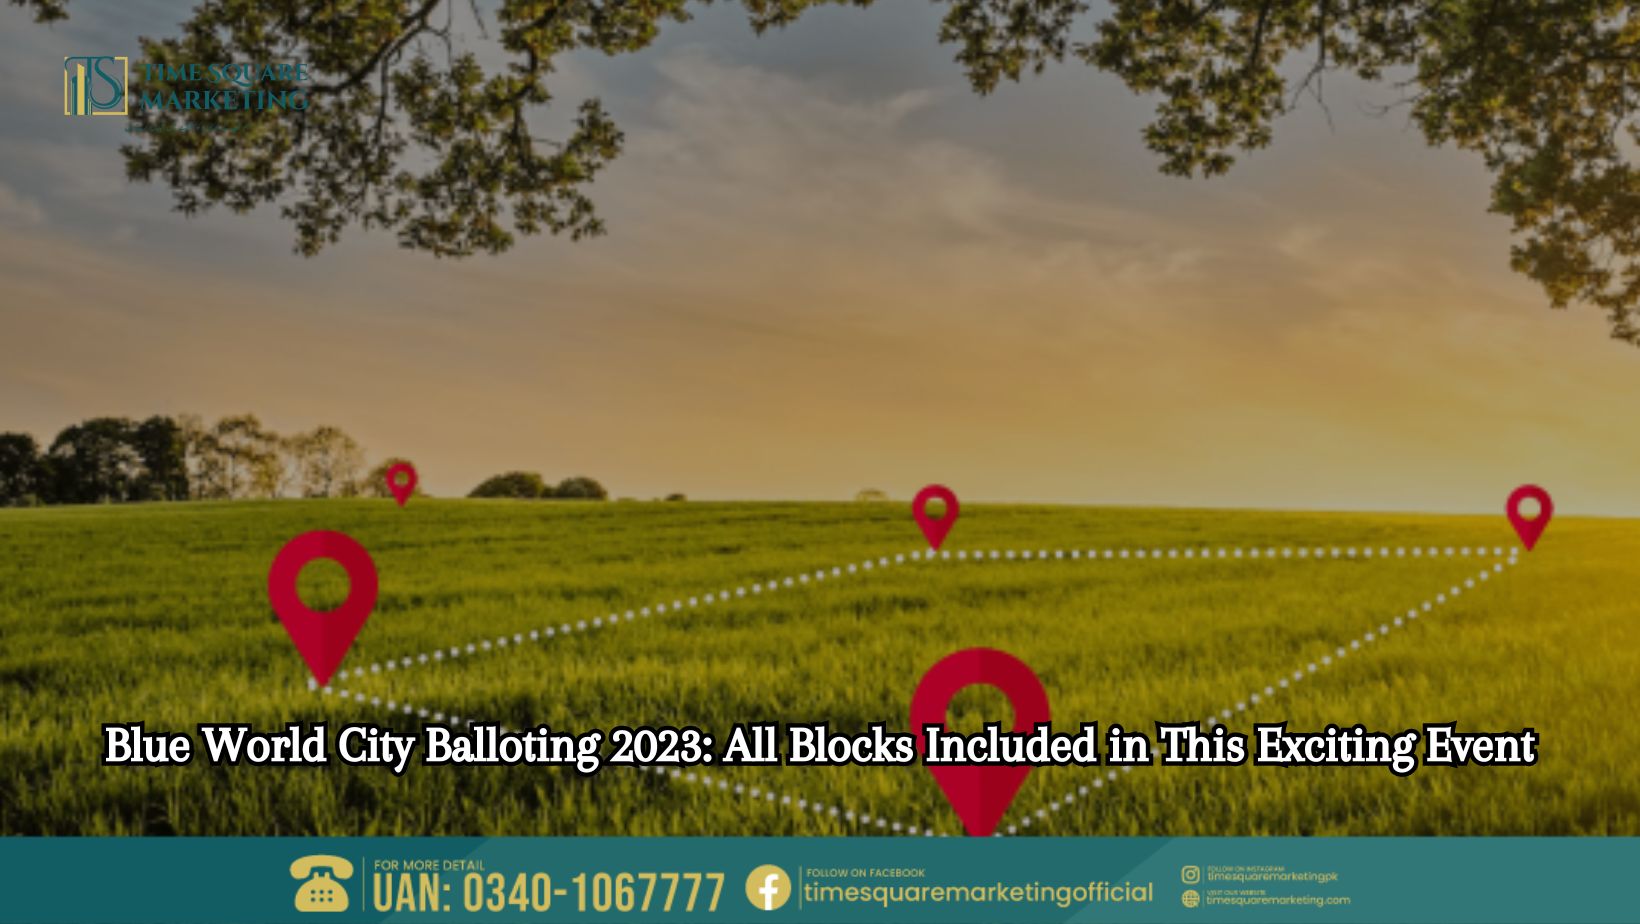 Blue World City Balloting 2023 All Blocks Included in This Exciting Event